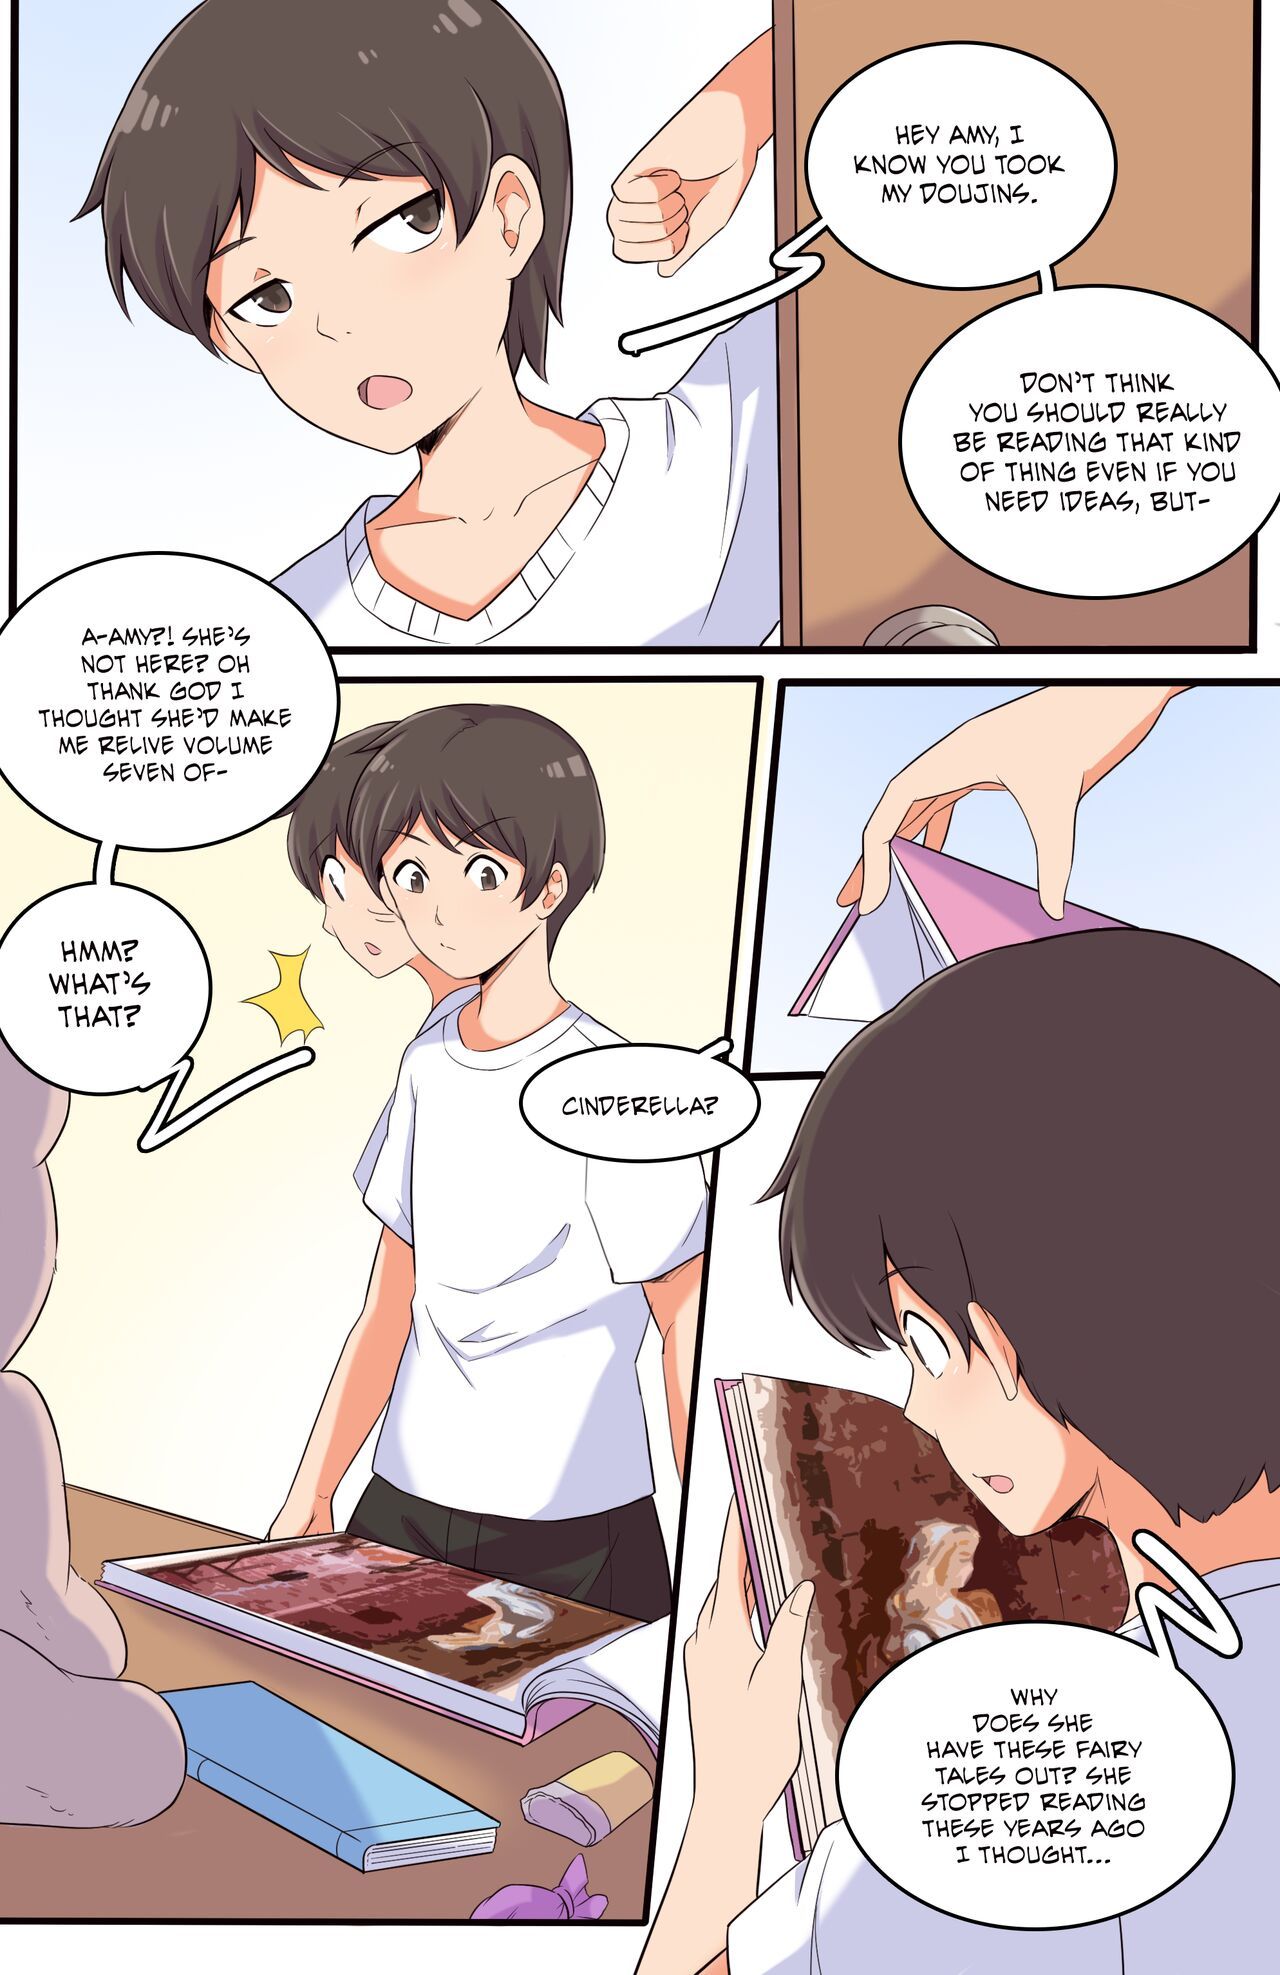 [MeowWithMe] My Little Sister, Amy Ch. 9 [Ongoing] 2